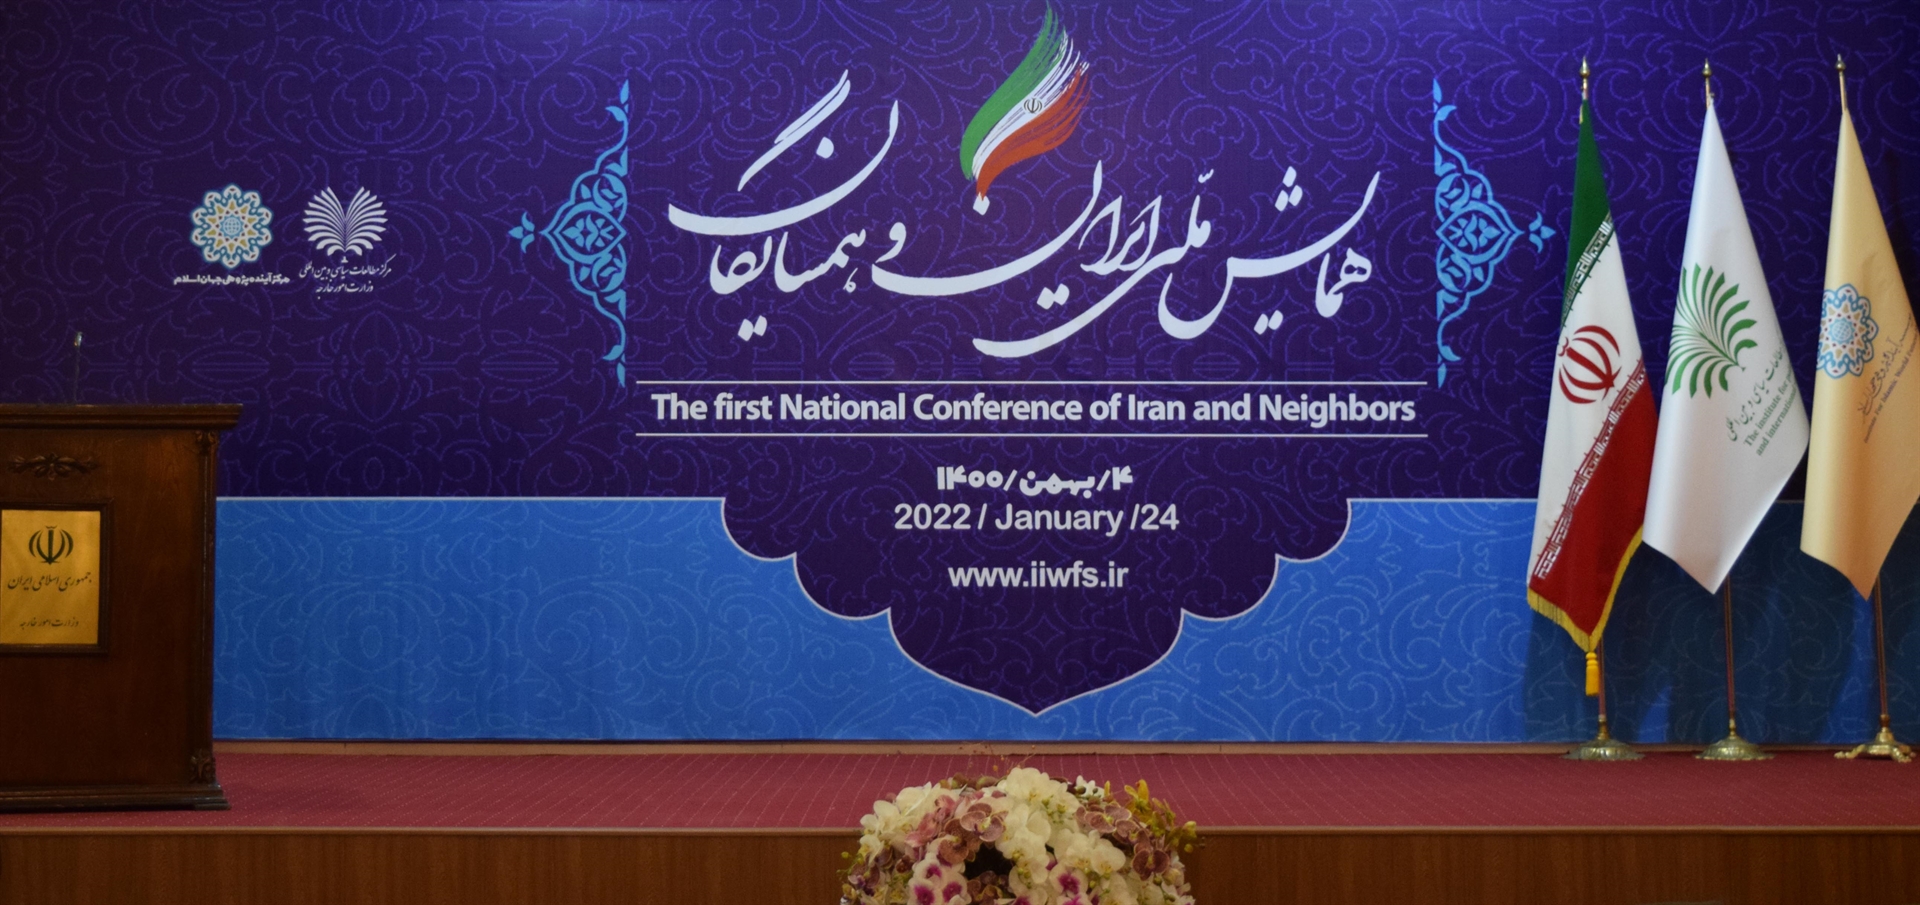 Iran And Its Neighbors Conference